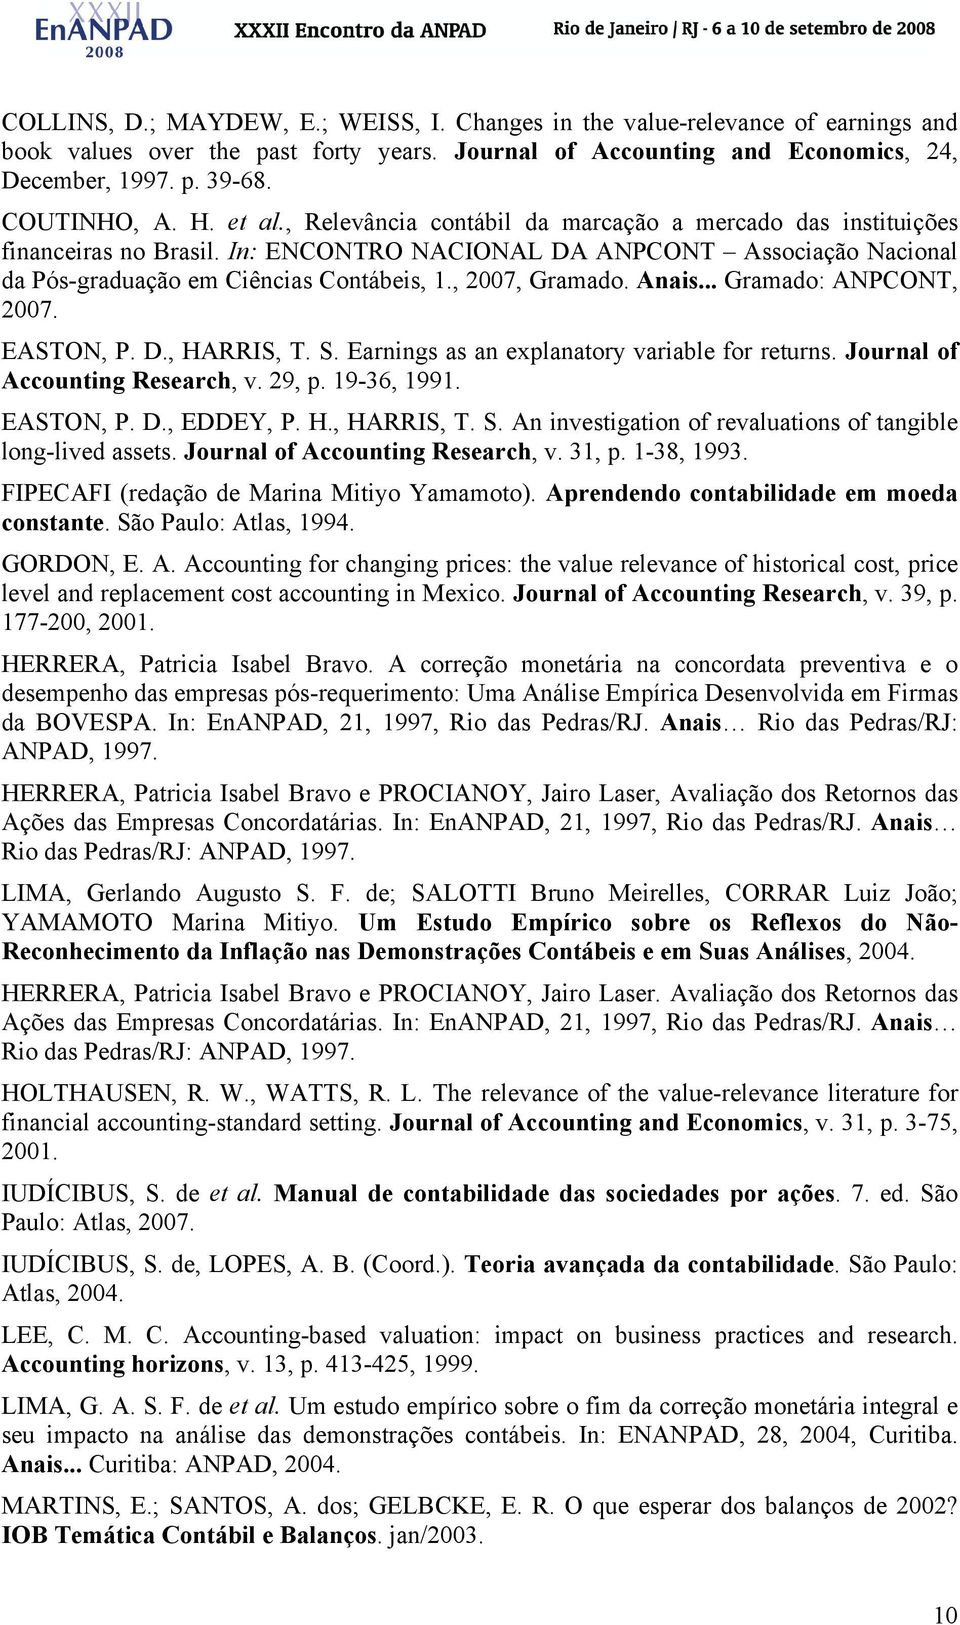 Anais... Gramado: ANPCONT, 2007. EASTON, P. D., HARRIS, T. S. Earnings as an explanaory variable for reurns. Journal of Accouning Research, v. 29, p. 19-36, 1991. EASTON, P. D., EDDEY, P. H., HARRIS, T. S. An invesigaion of revaluaions of angible long-lived asses.